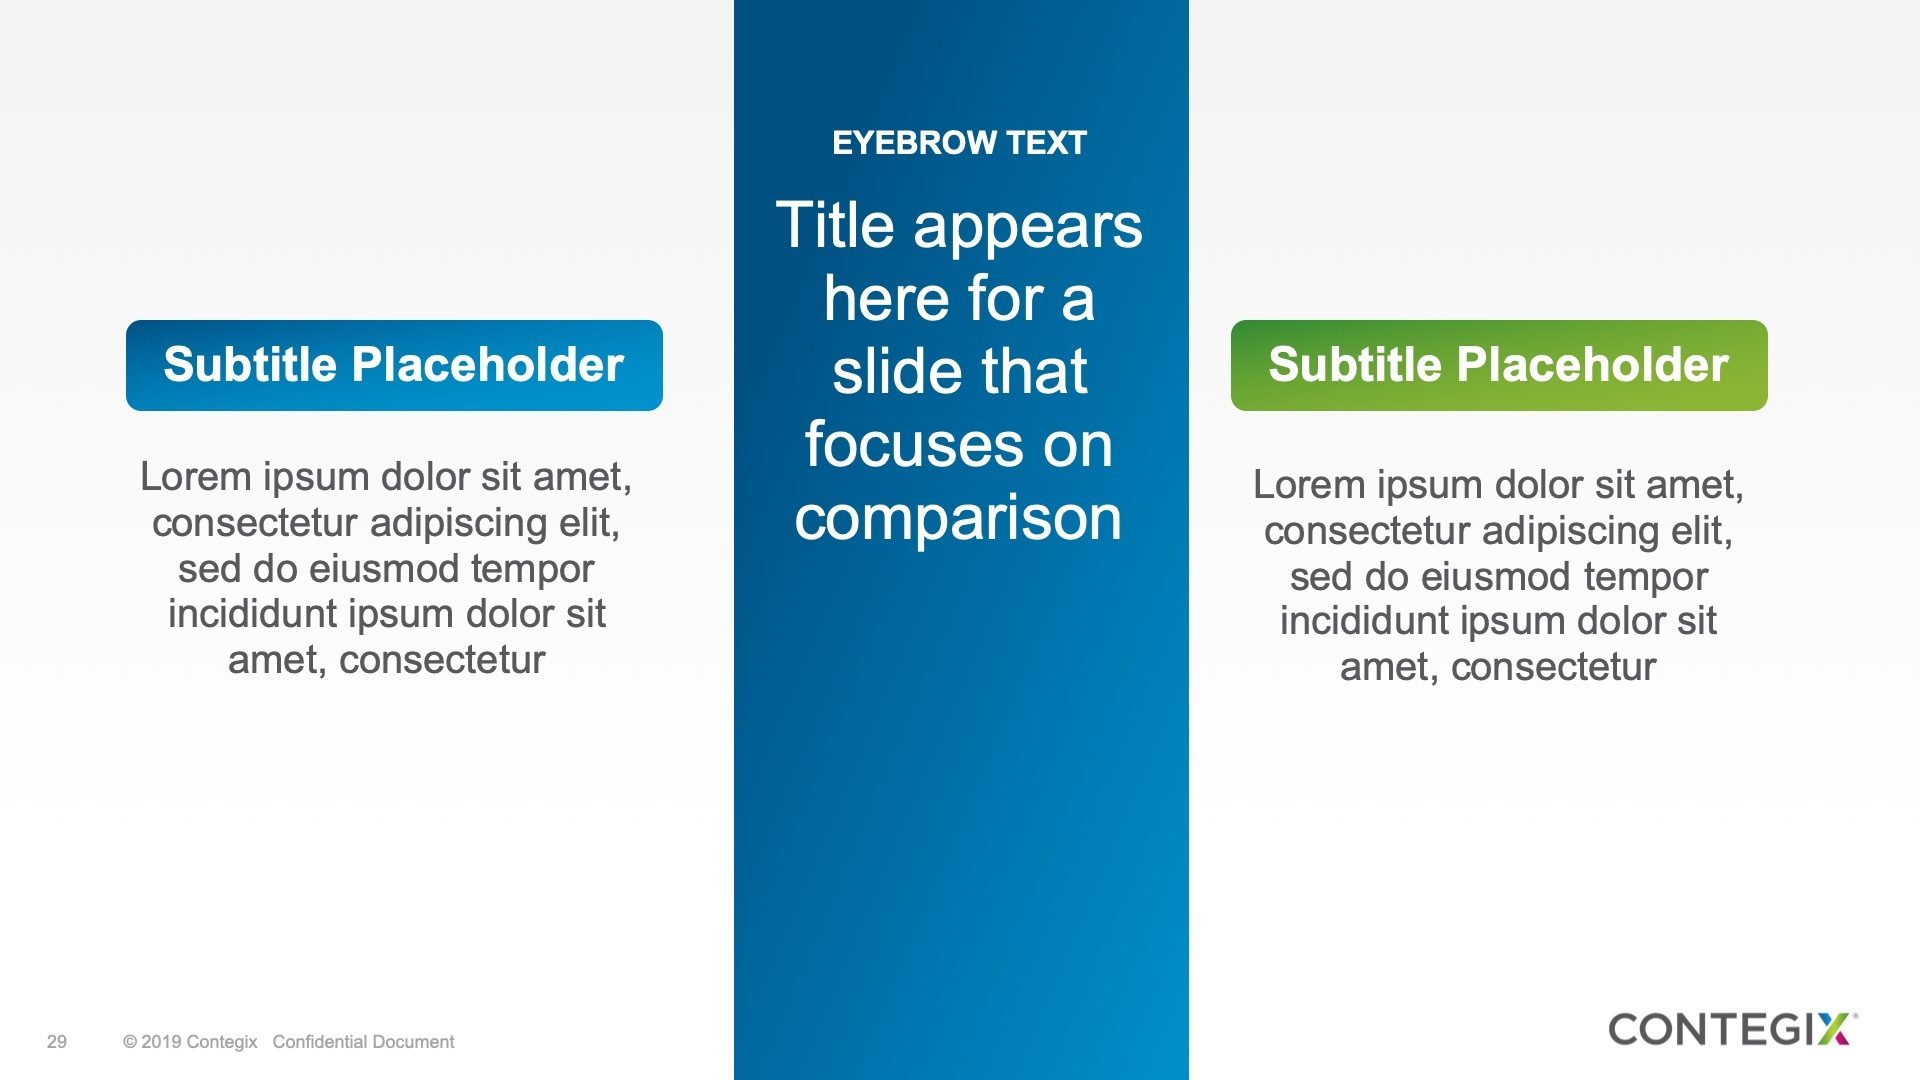 An image of a comparison layout from the Contegix PowerPoint presentation.